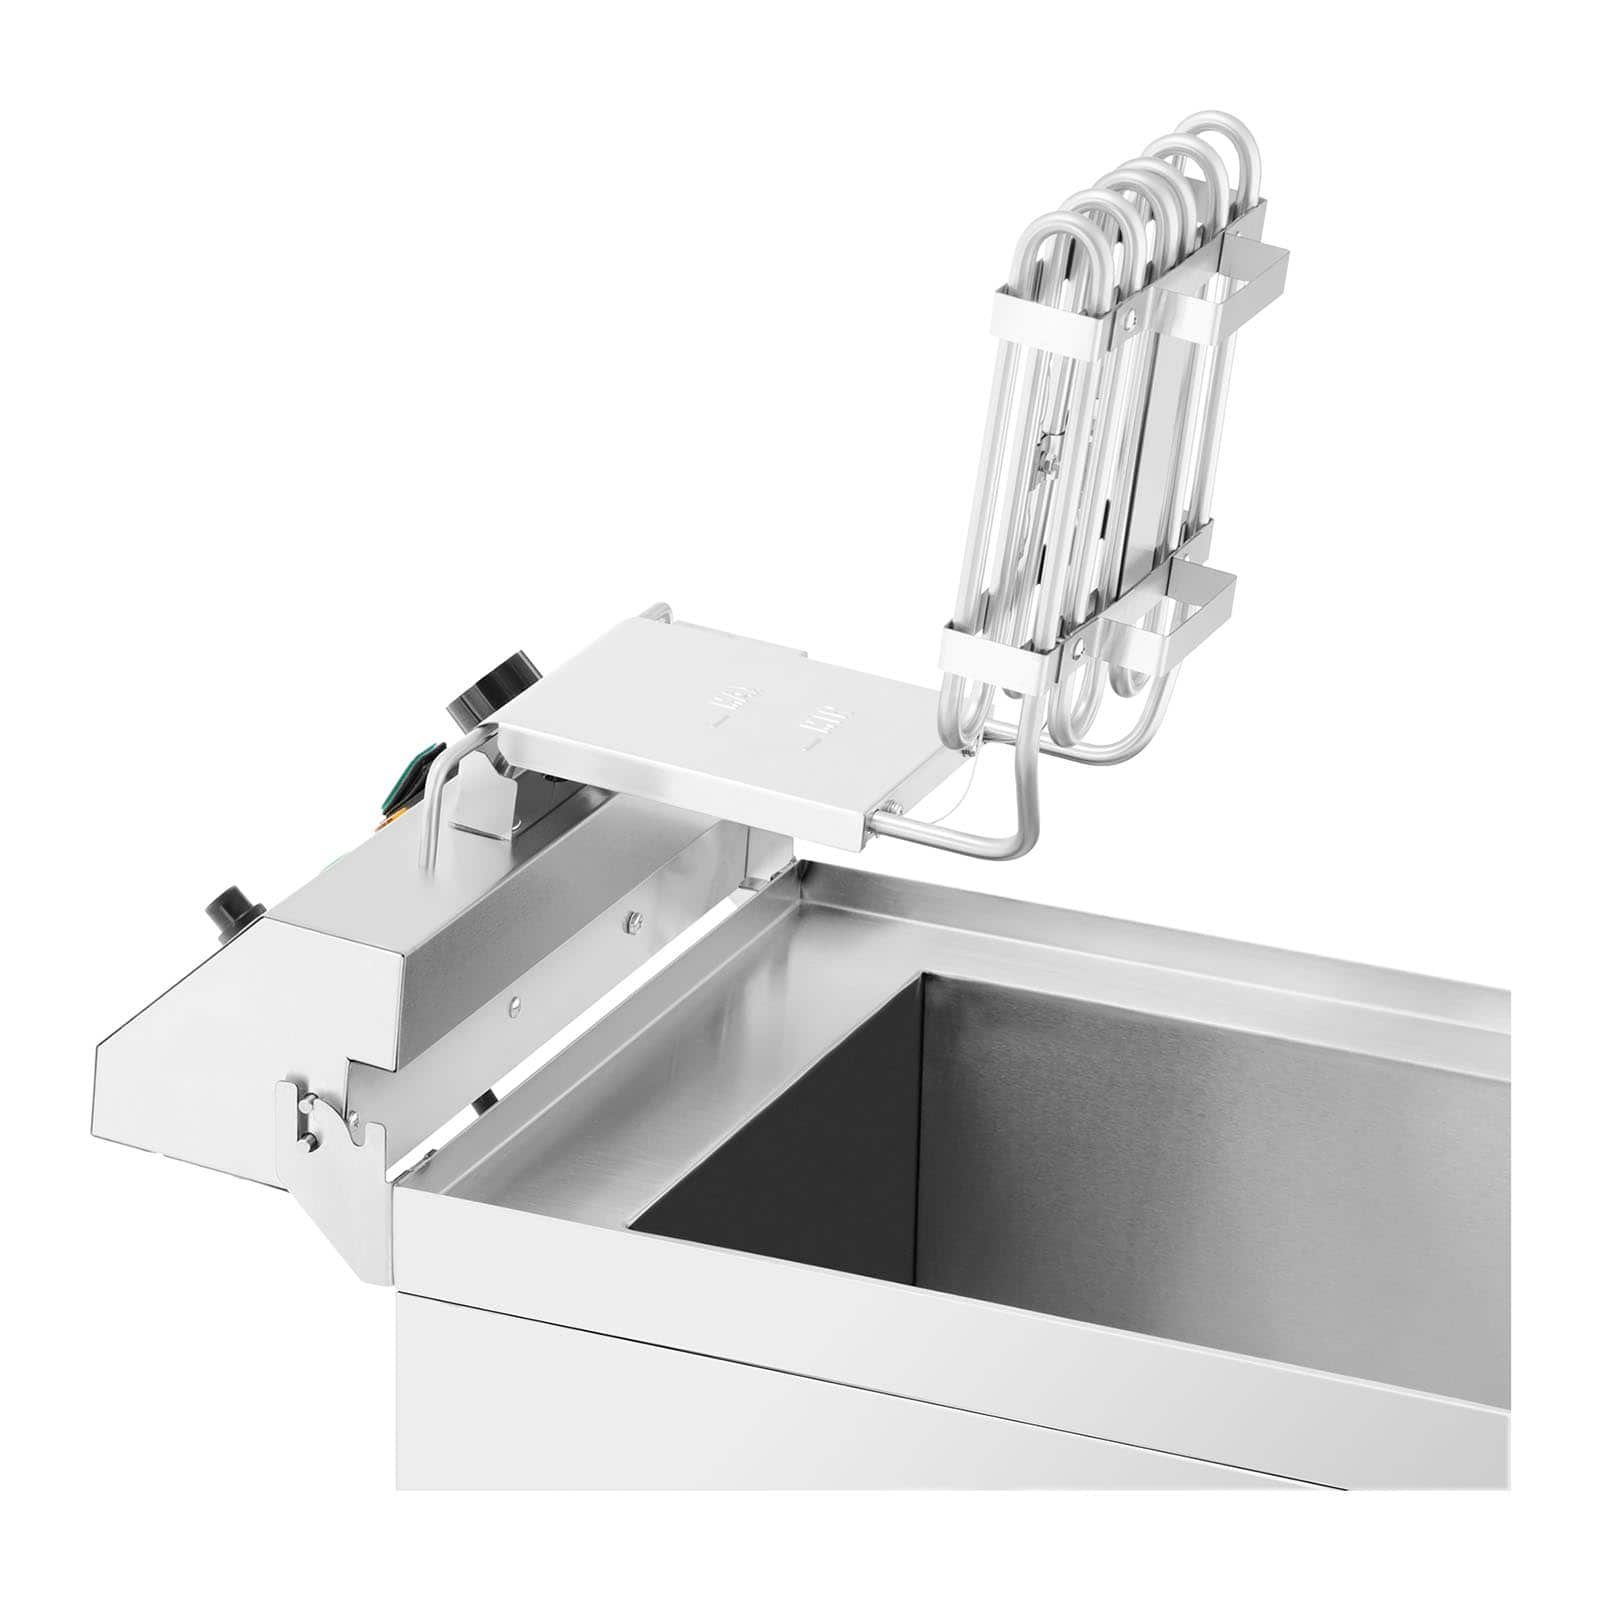 Royal Catering Fritteuse Elektro-Fritteuse Fritteuse 3000 Fritteuse Gastro 3.000 W 13 W, L Kaltzonen